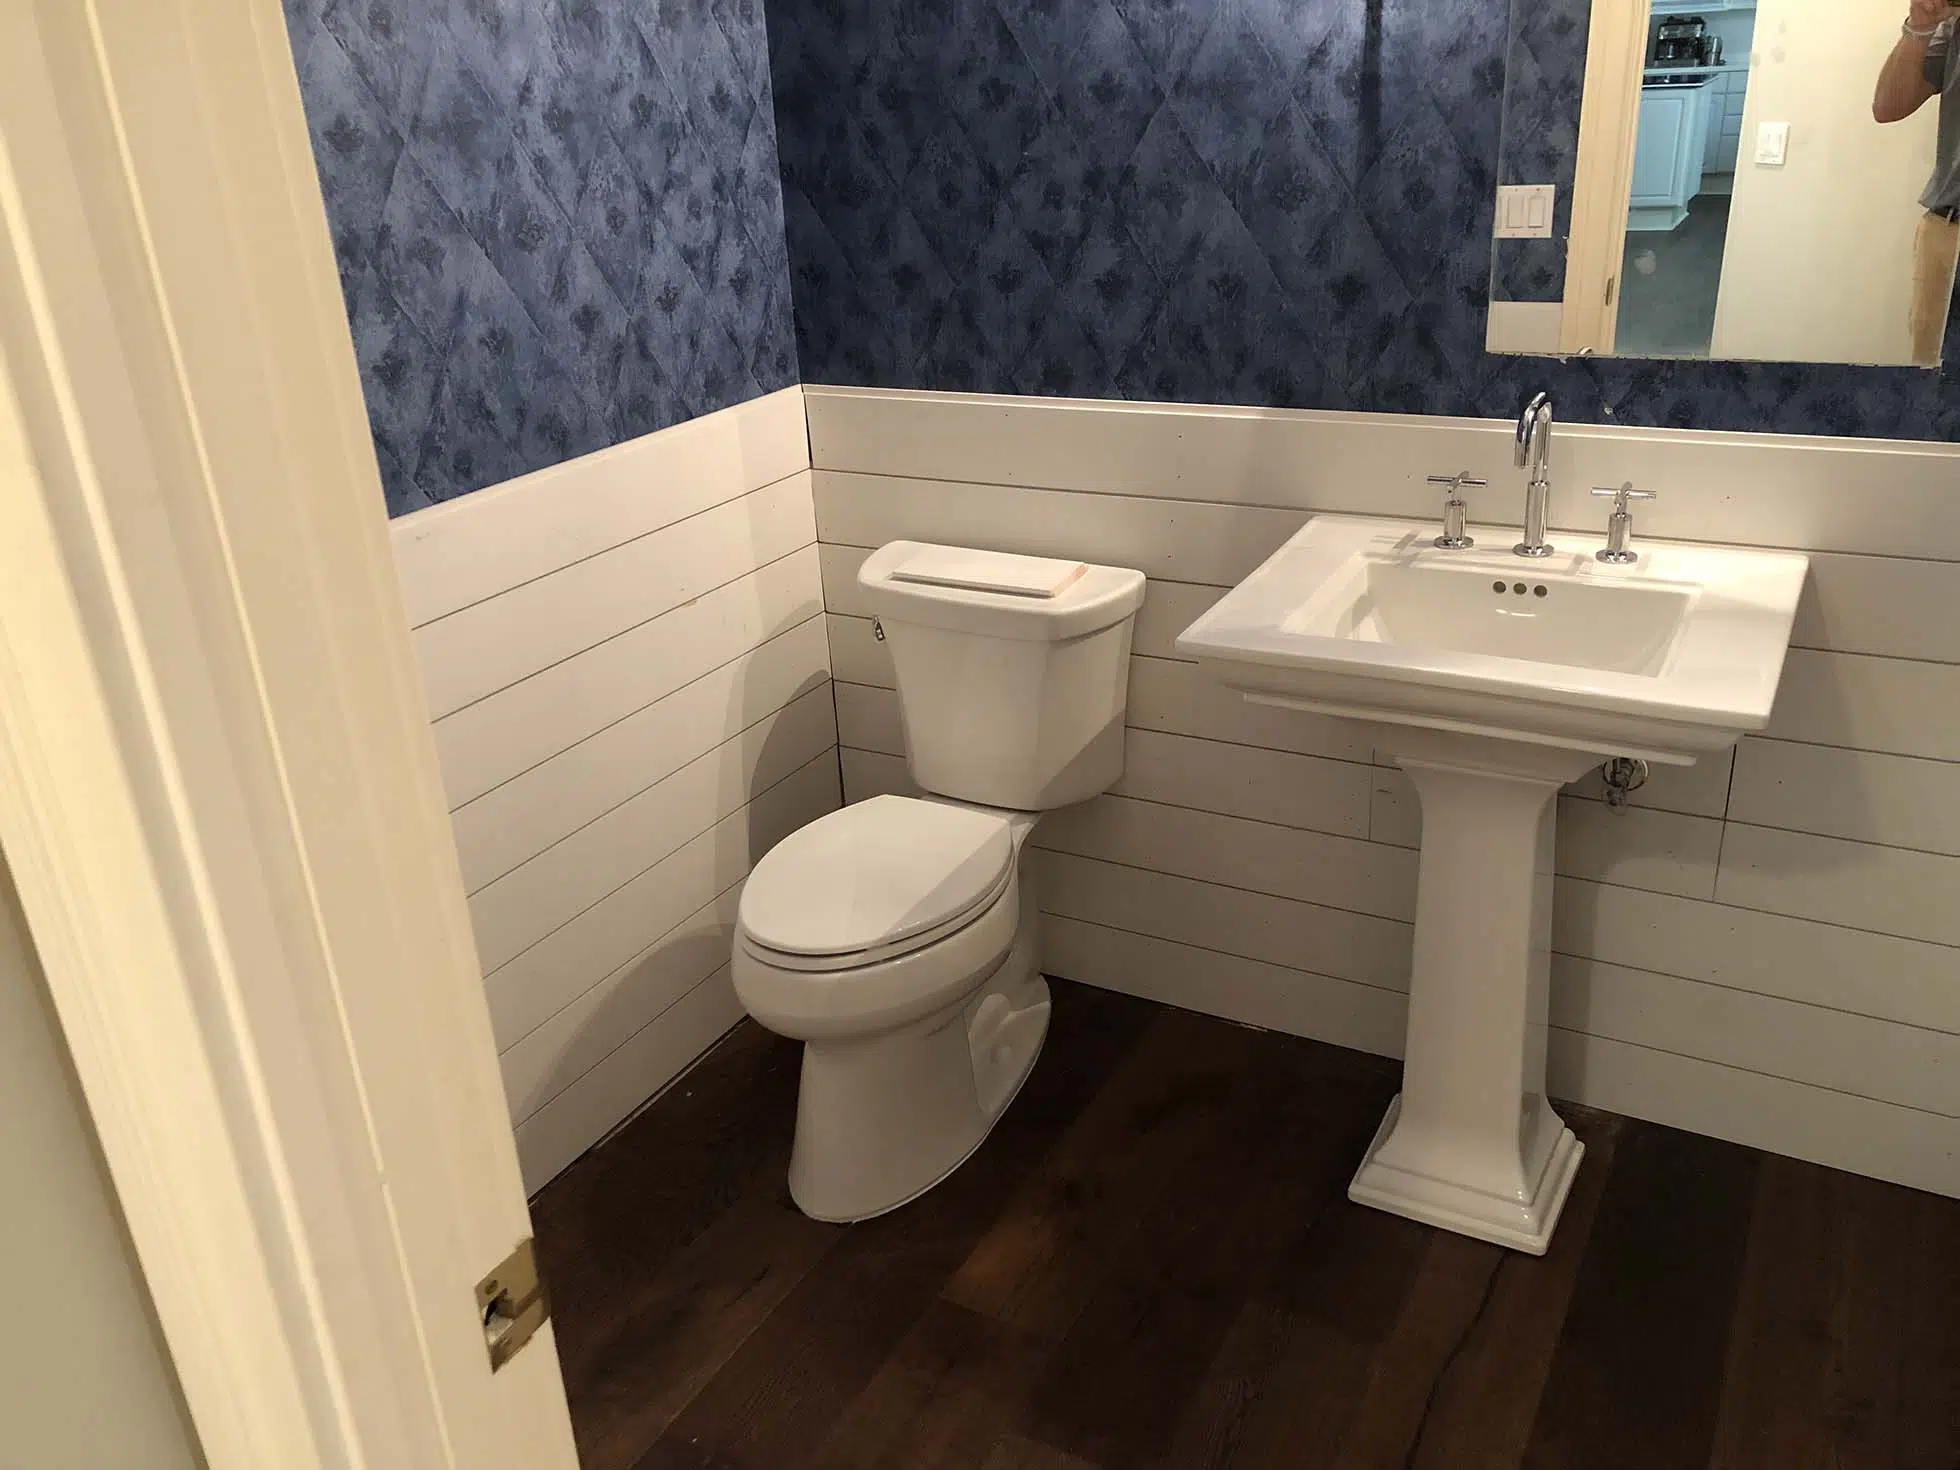 BroadRiver Plumbing Explains Why Toilet Installation Should Be Left Only to Professionals